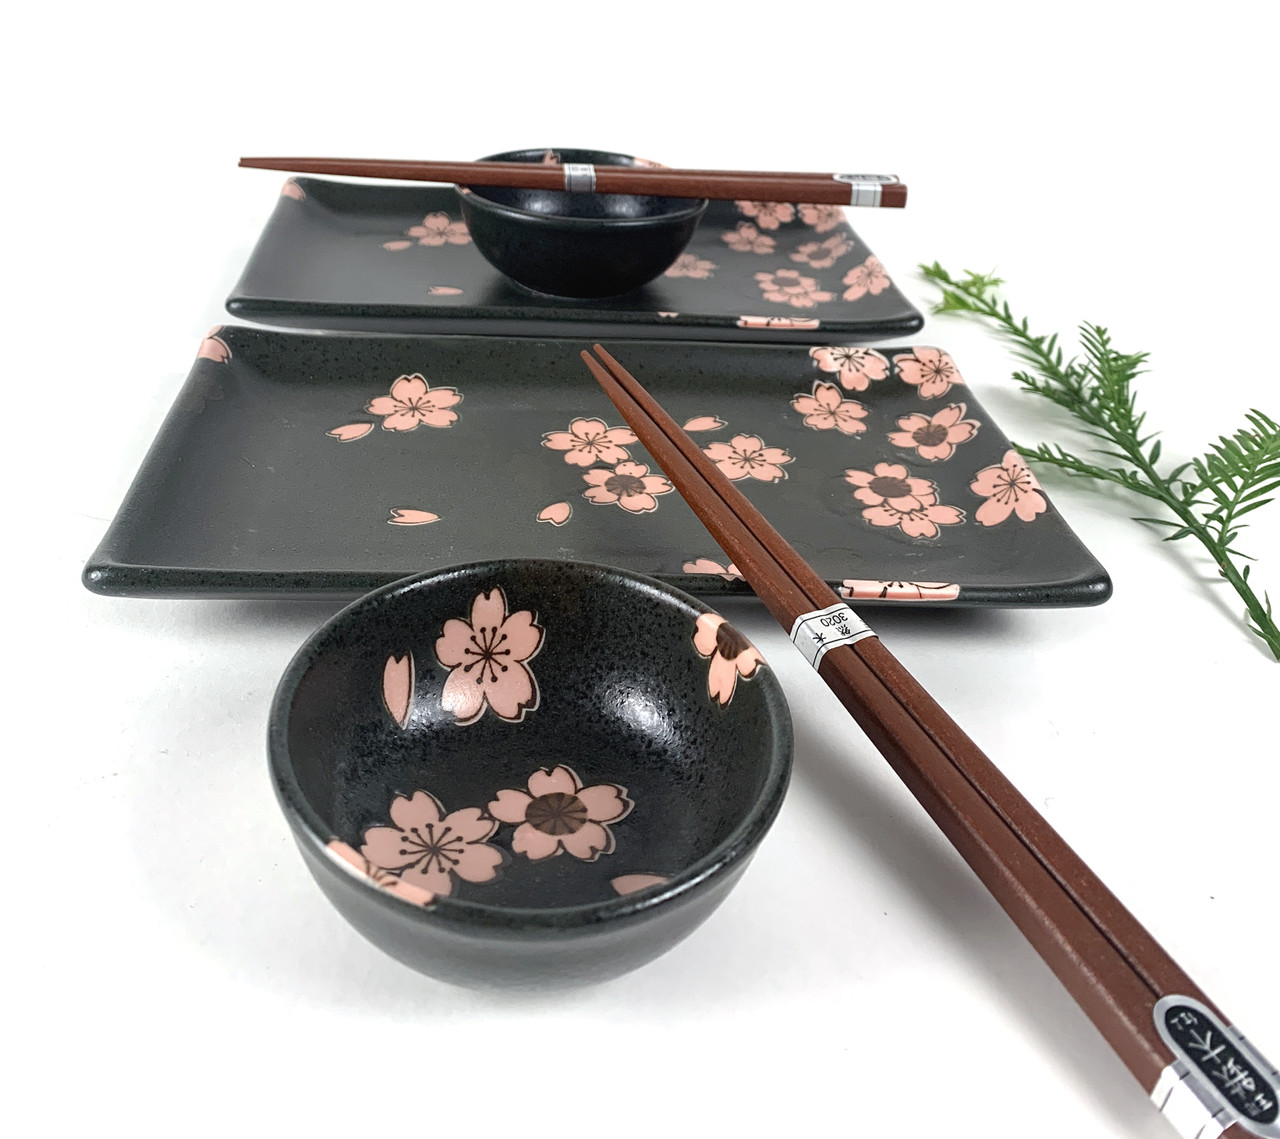 Japanese Sushi Set Porcelain Sushi Plates Soy Sauce Dipping Bowls and  Chopsticks Gift Set, Black and Pink Color Cherry Blossom Pattern, Made in  Japan - Japan Bargain Inc